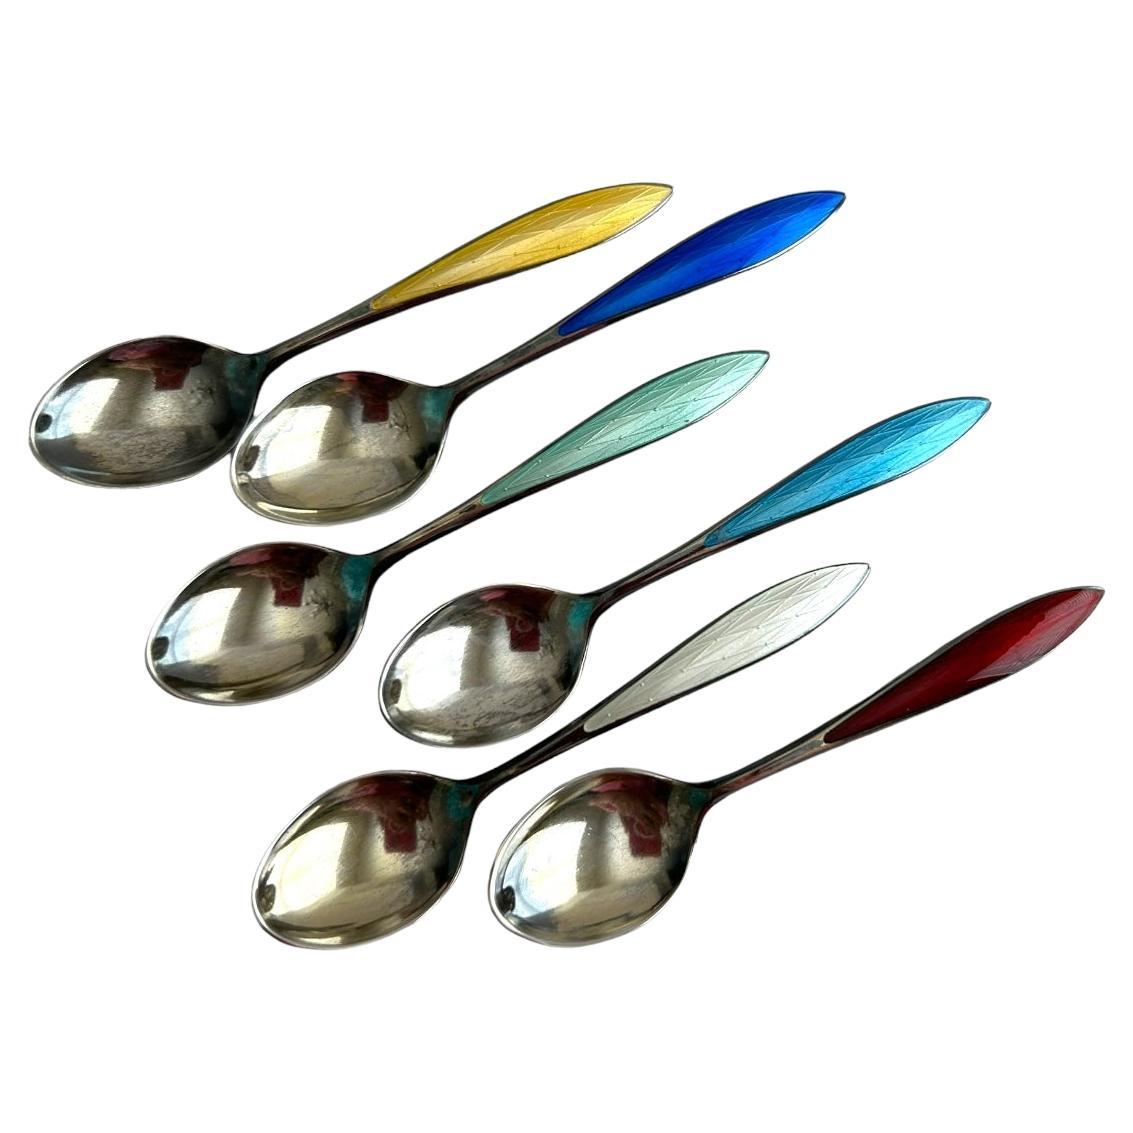 Are sterling-silver spoons solid silver?